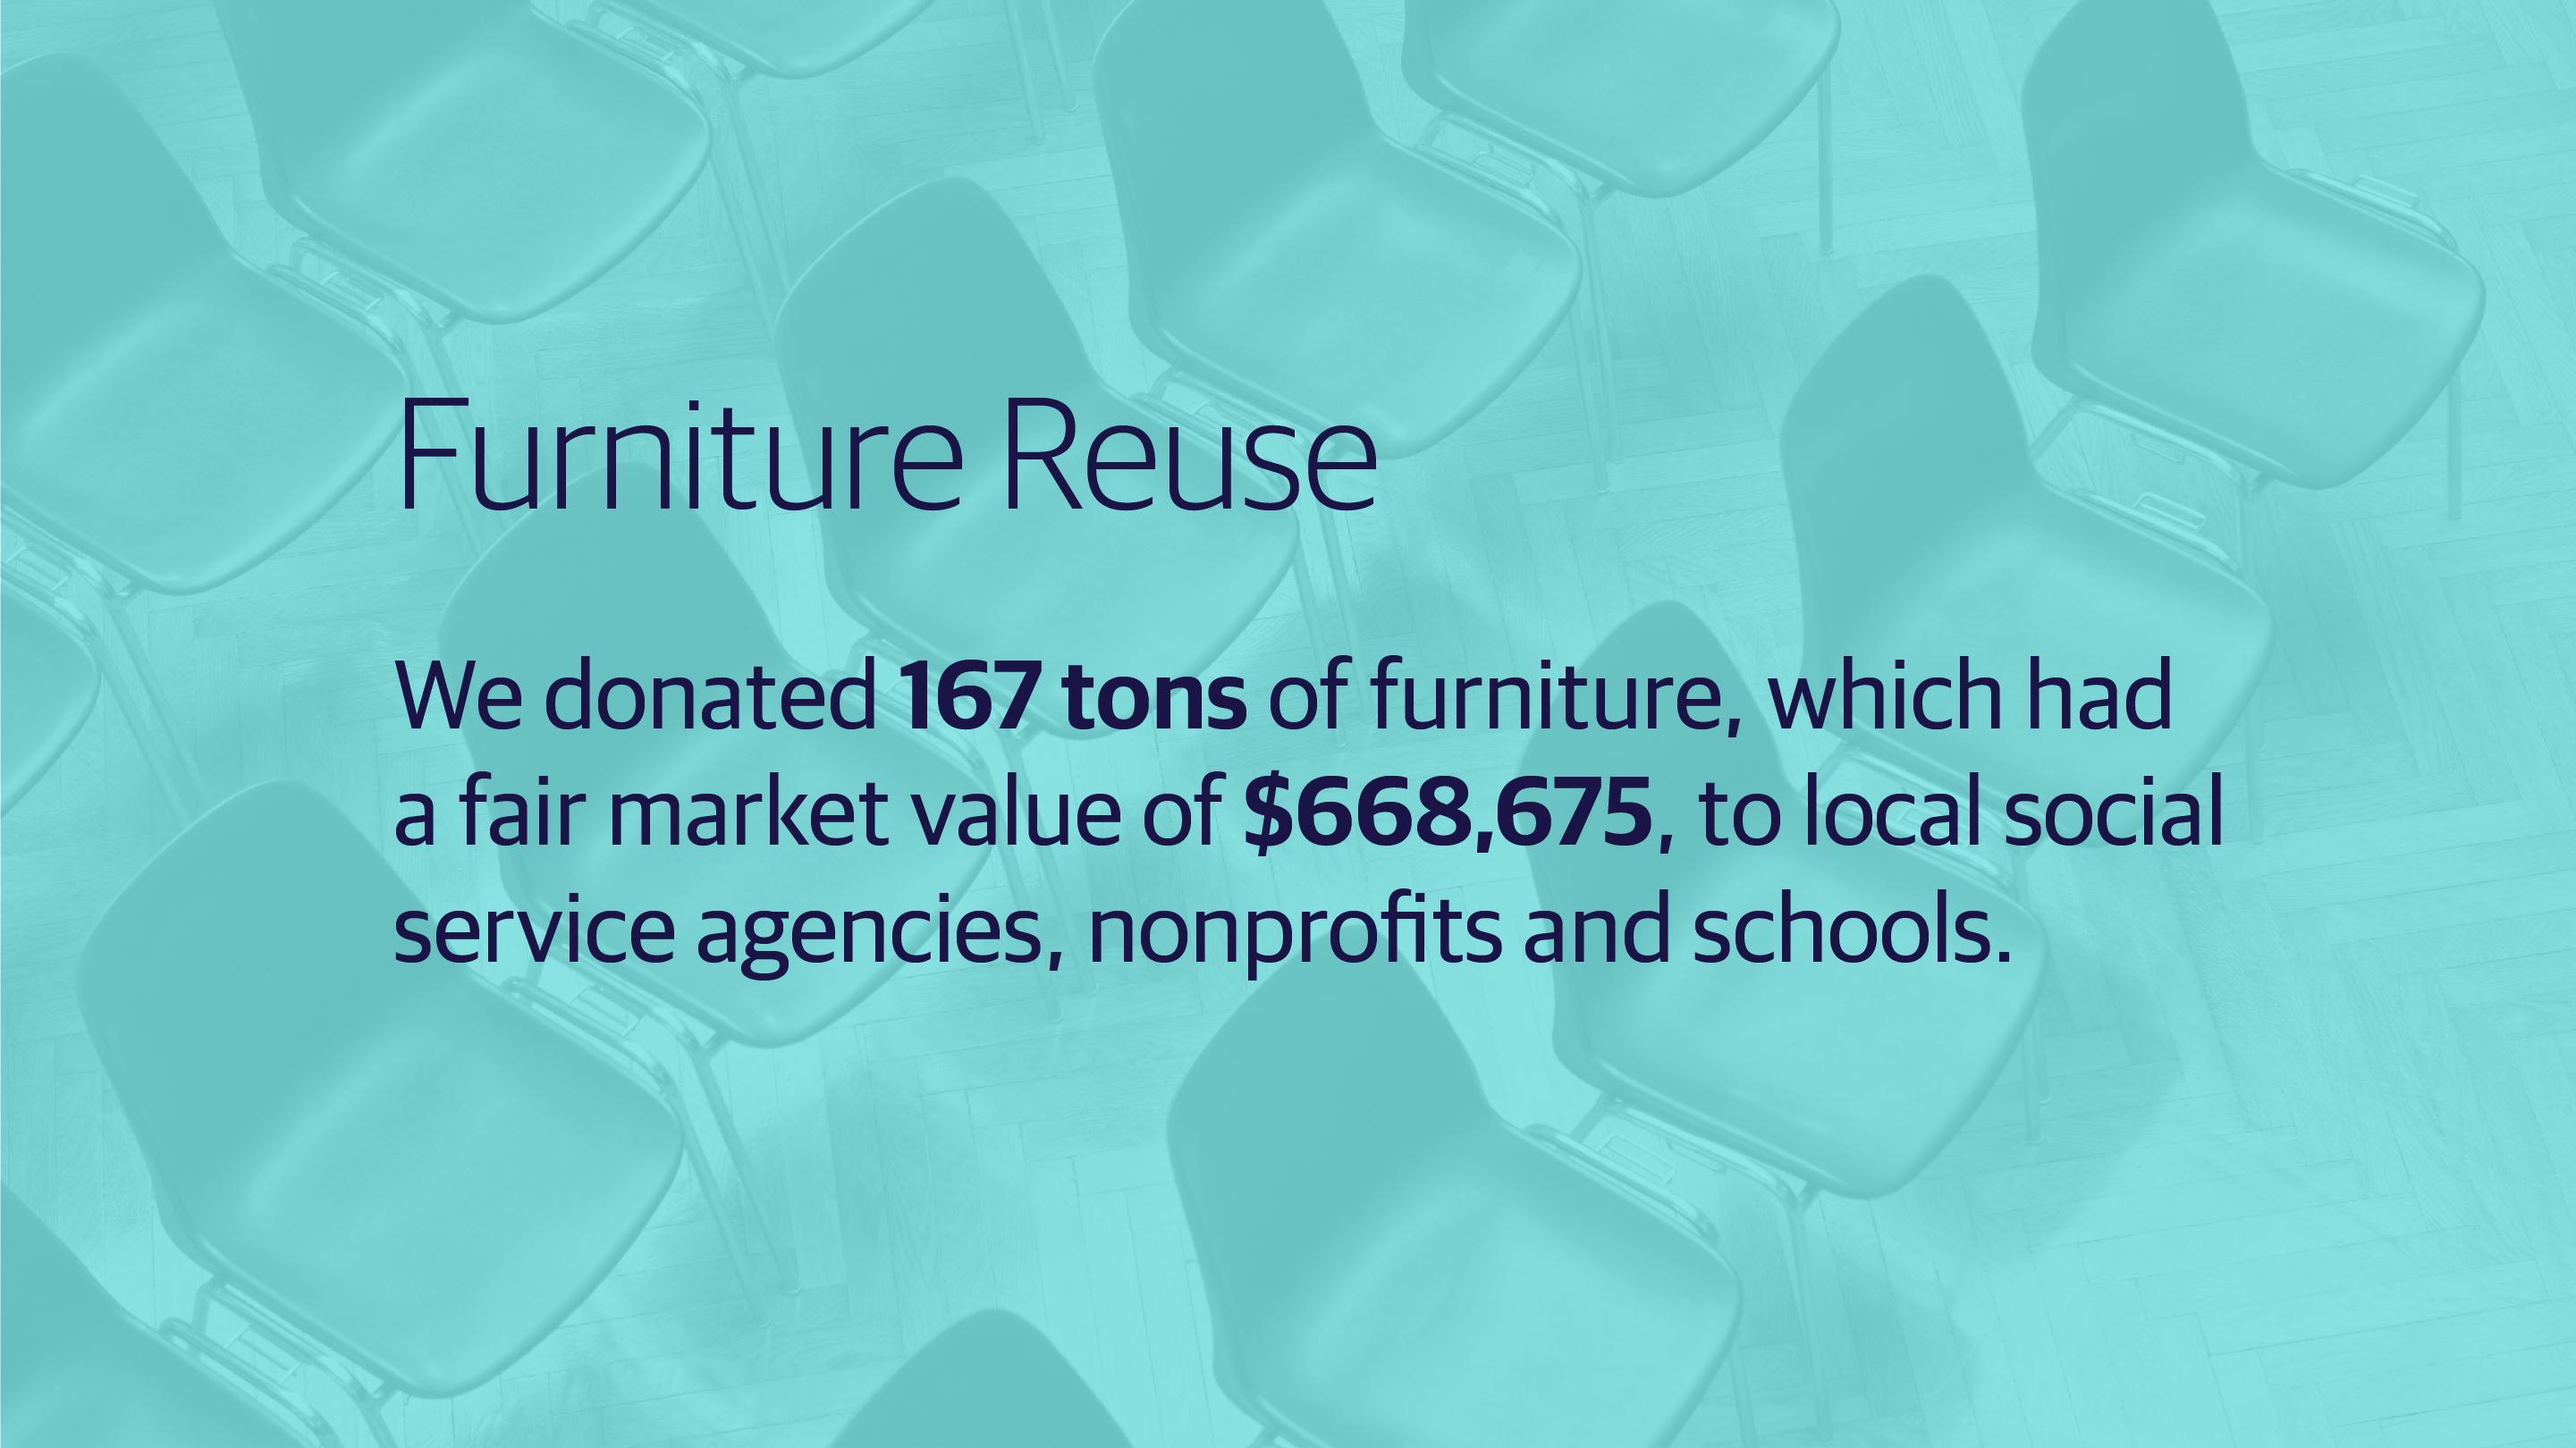 (slide 2 of 3) •	“We donated 167 tons of office furniture, which had a fair market value of $668,675, to local social service agencies, nonprofits and schools.”. 